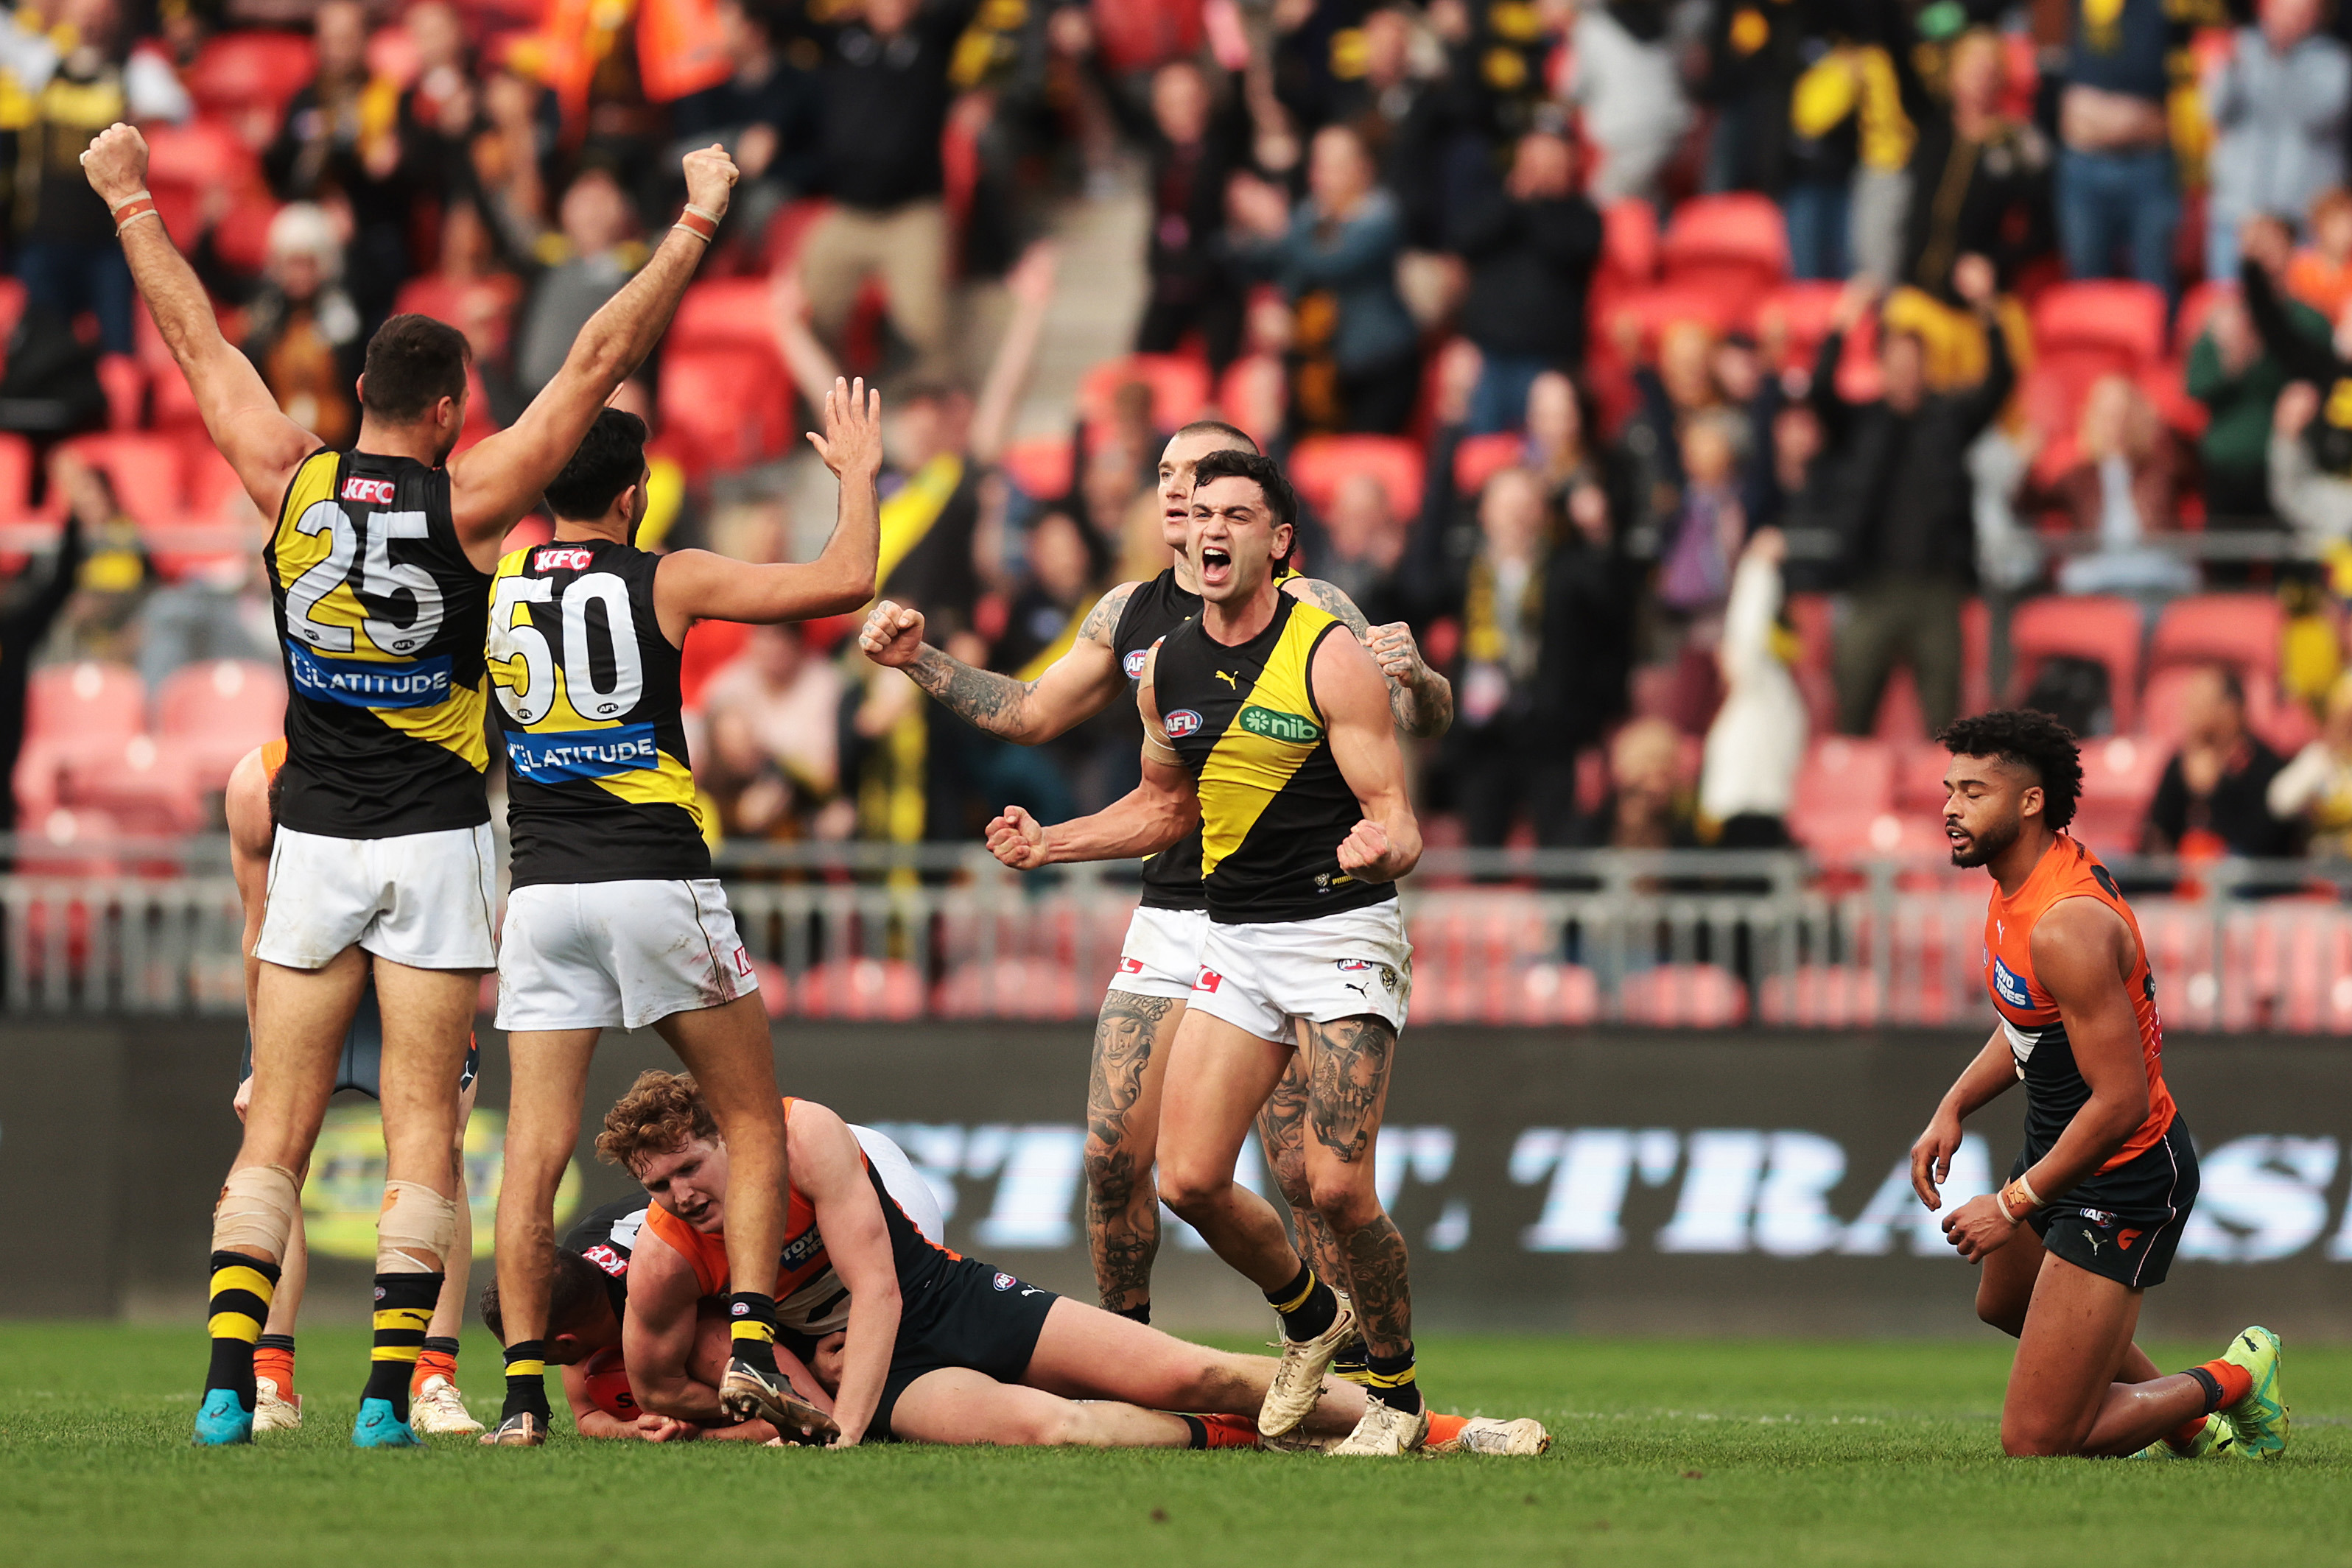 'Classy' Tigers star lauded after beating old team